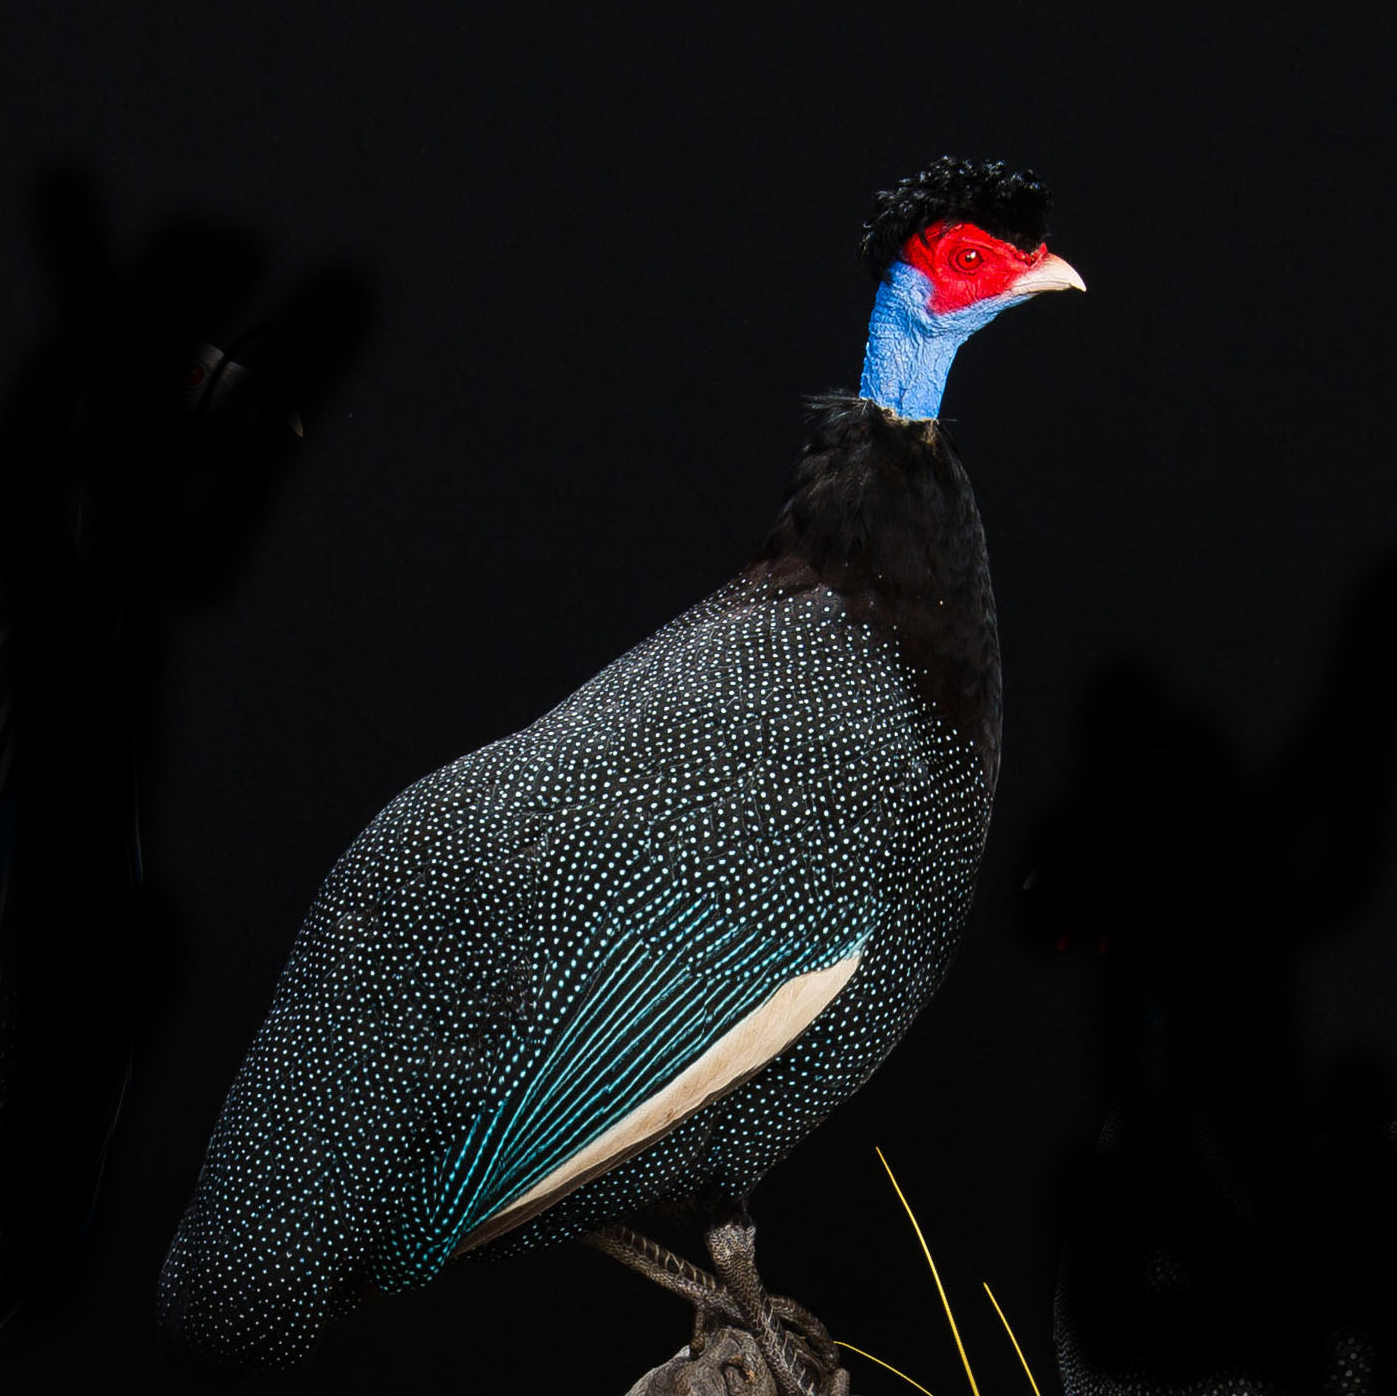 Crested Guineafowl 